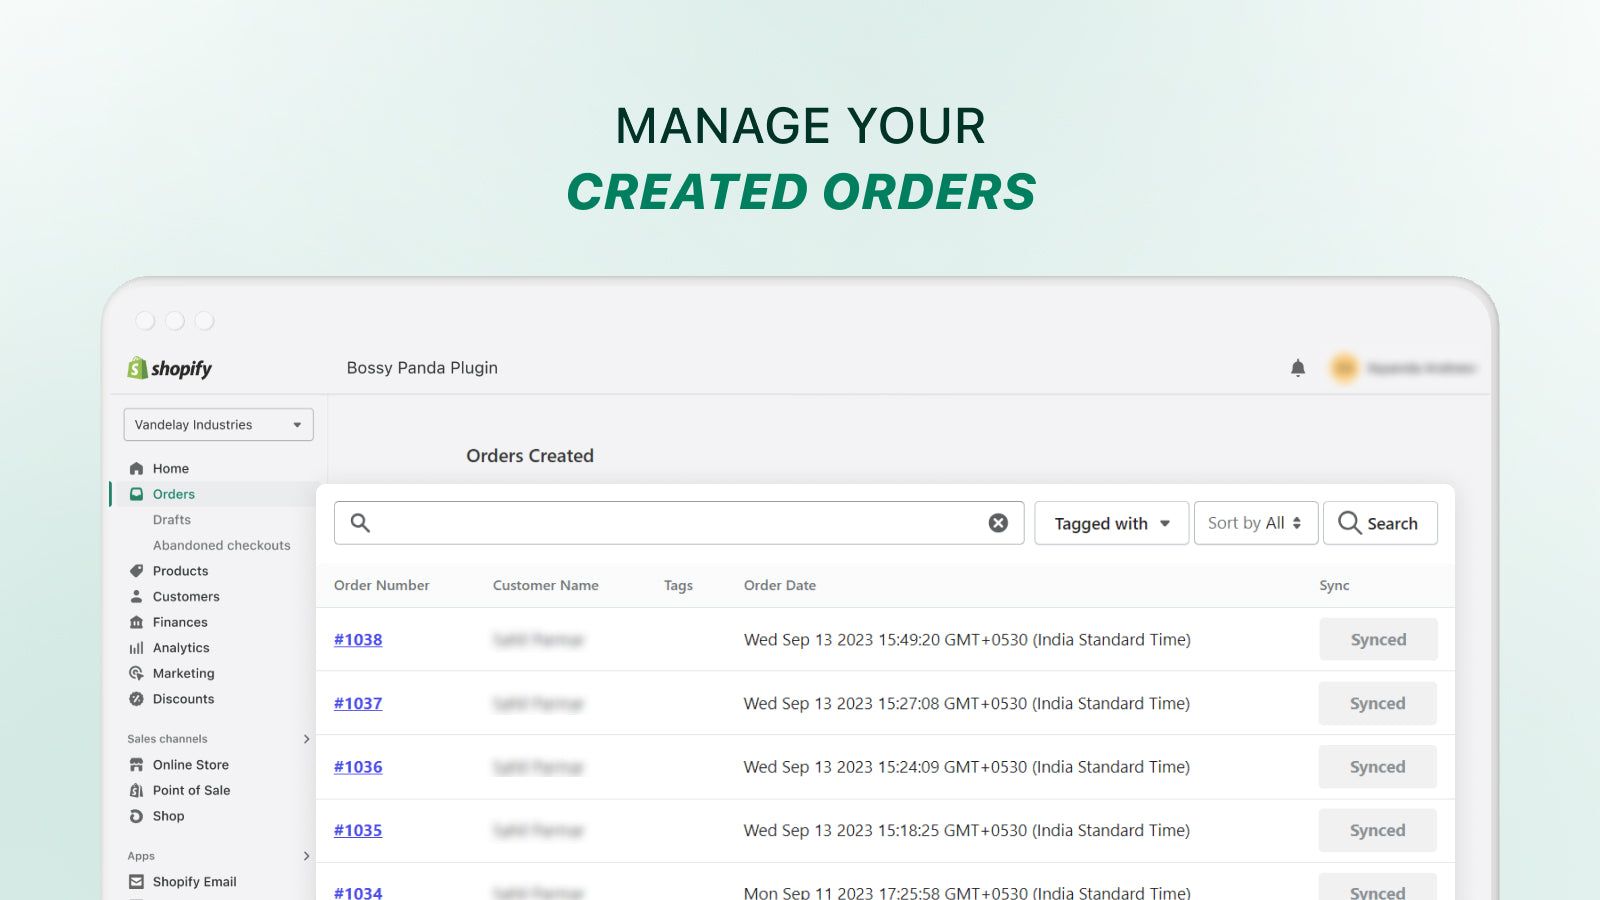 Manage Orders